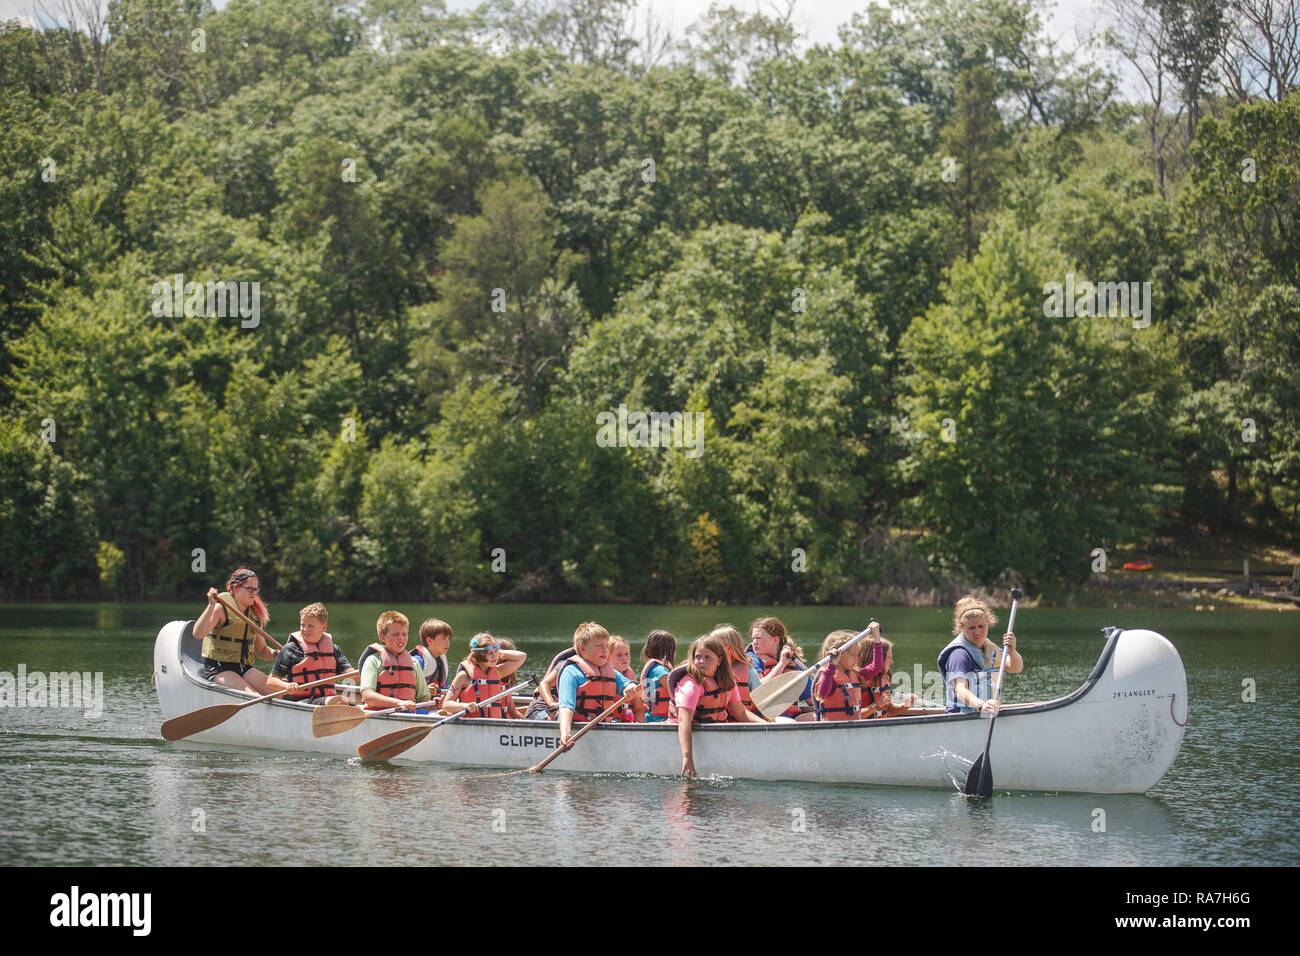 Many young children wearing life preservers fill a large canoe that paddles in a lake during their summer camp. Stock Photo